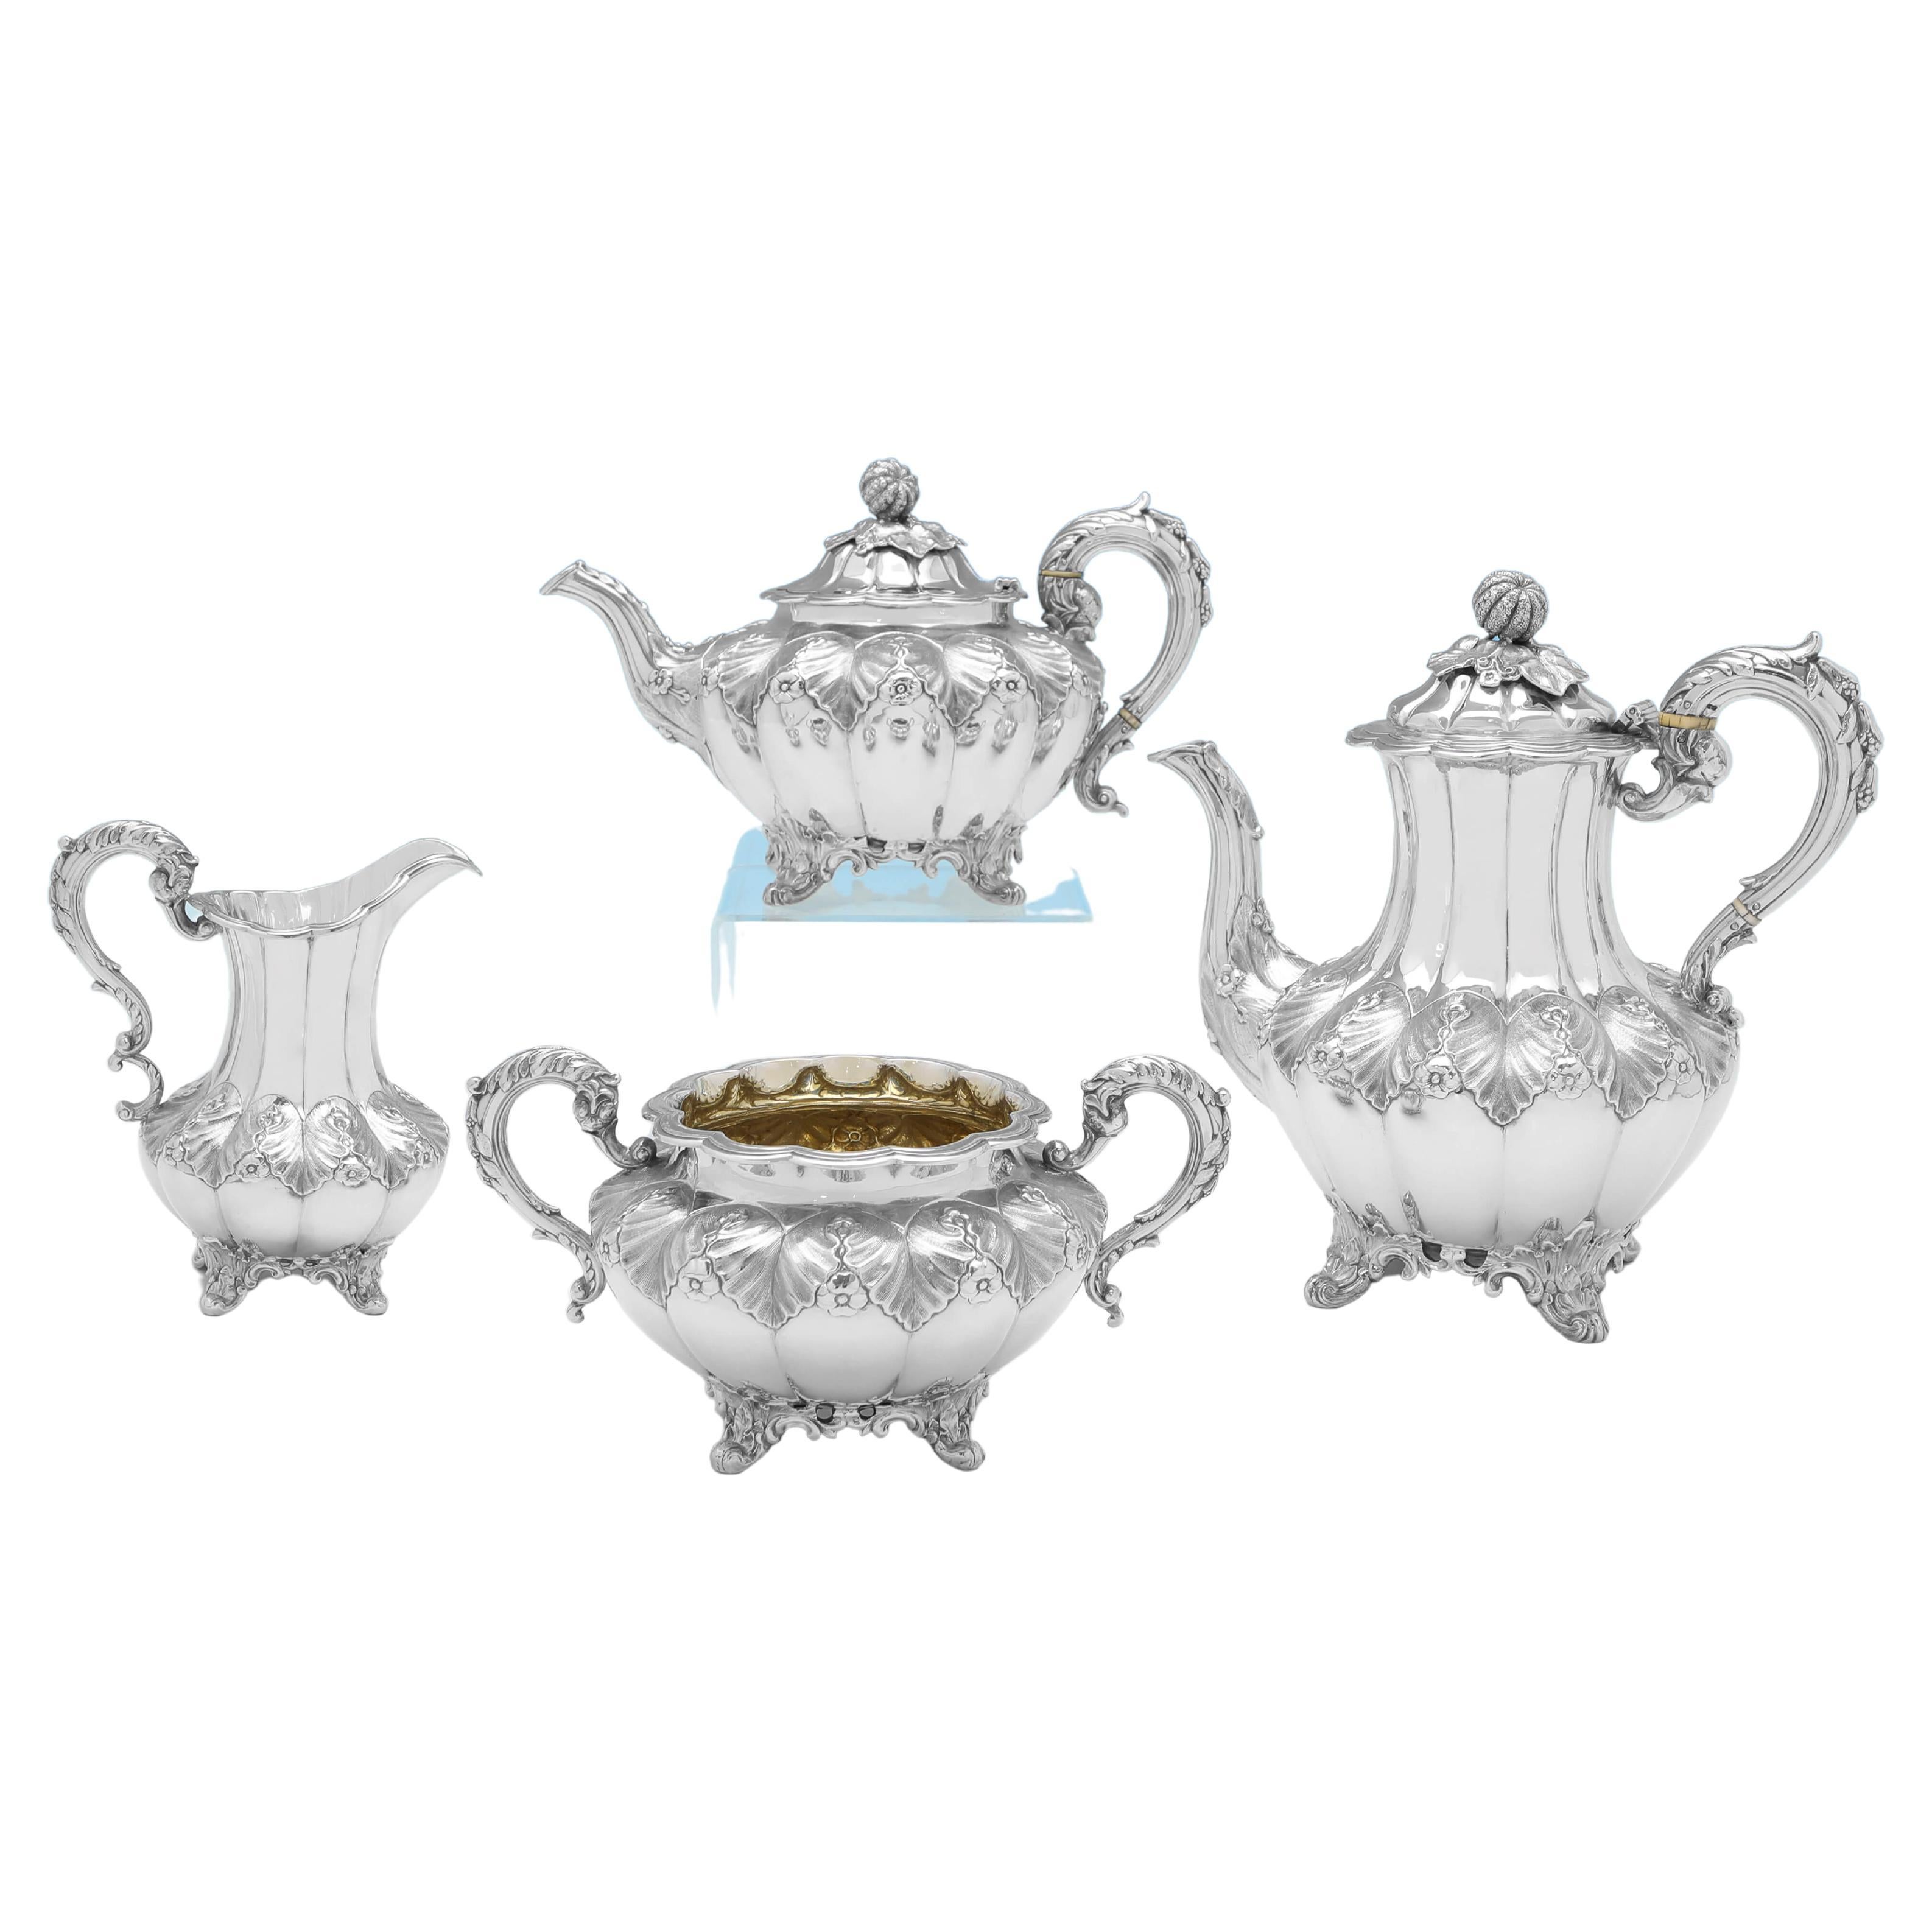 Melon Shaped Victorian Antique Sterling Silver Tea & Coffee Set - London 1851 For Sale